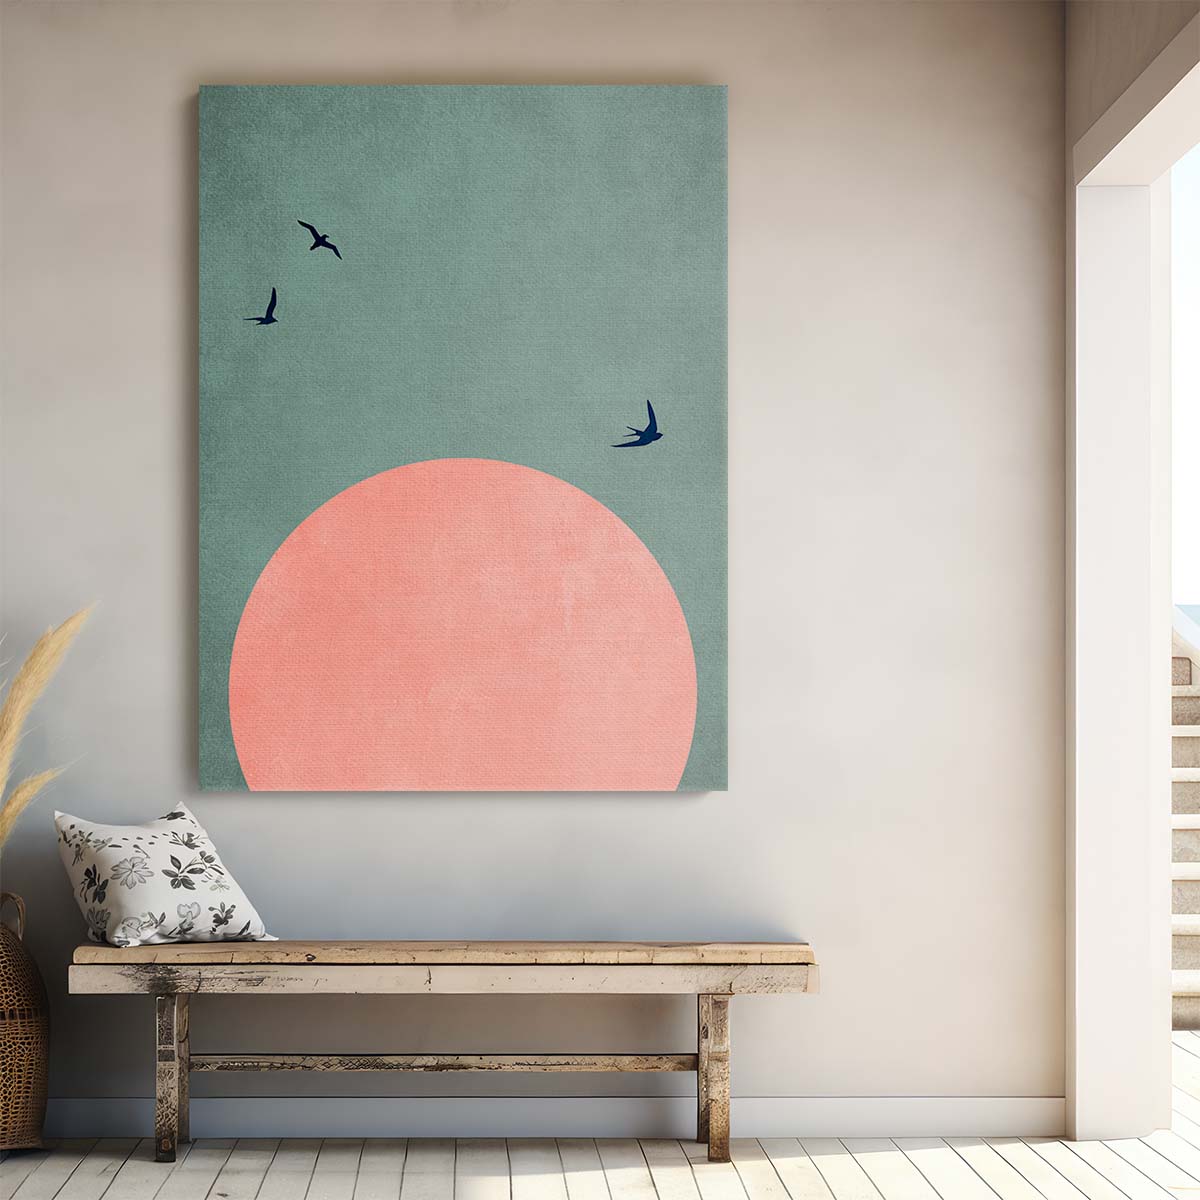 Kubistika's Abstract Geometric Bird Illustration in Nature at Dusk by Luxuriance Designs, made in USA